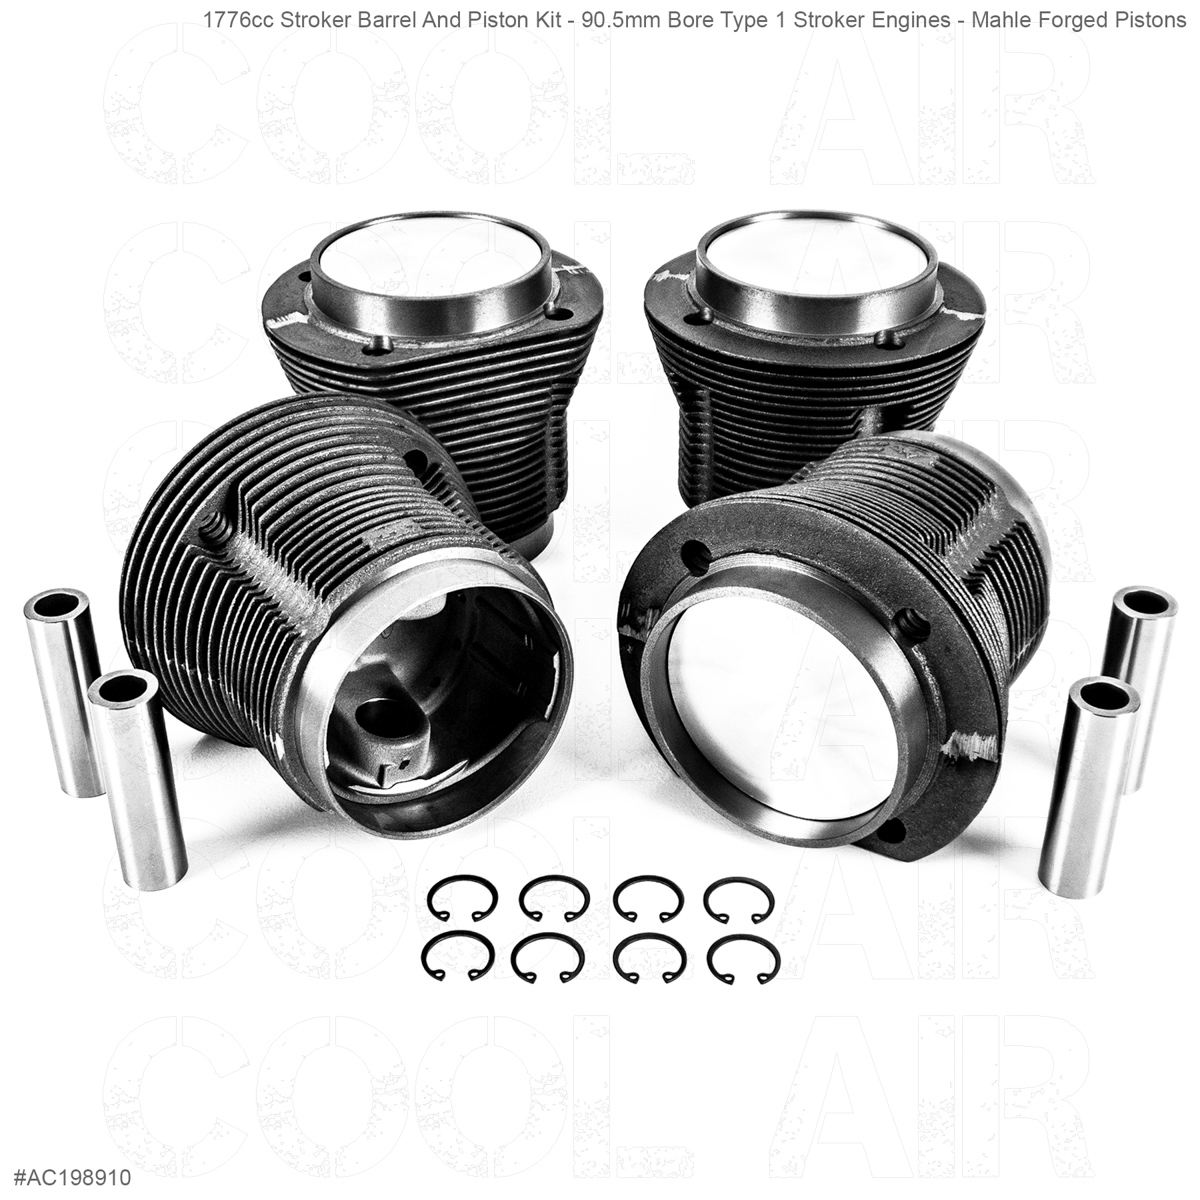 1776cc Stroker Barrel And Piston Kit - 90.5mm Bore Type 1 Stroker Engines - Mahle Forged Pistons